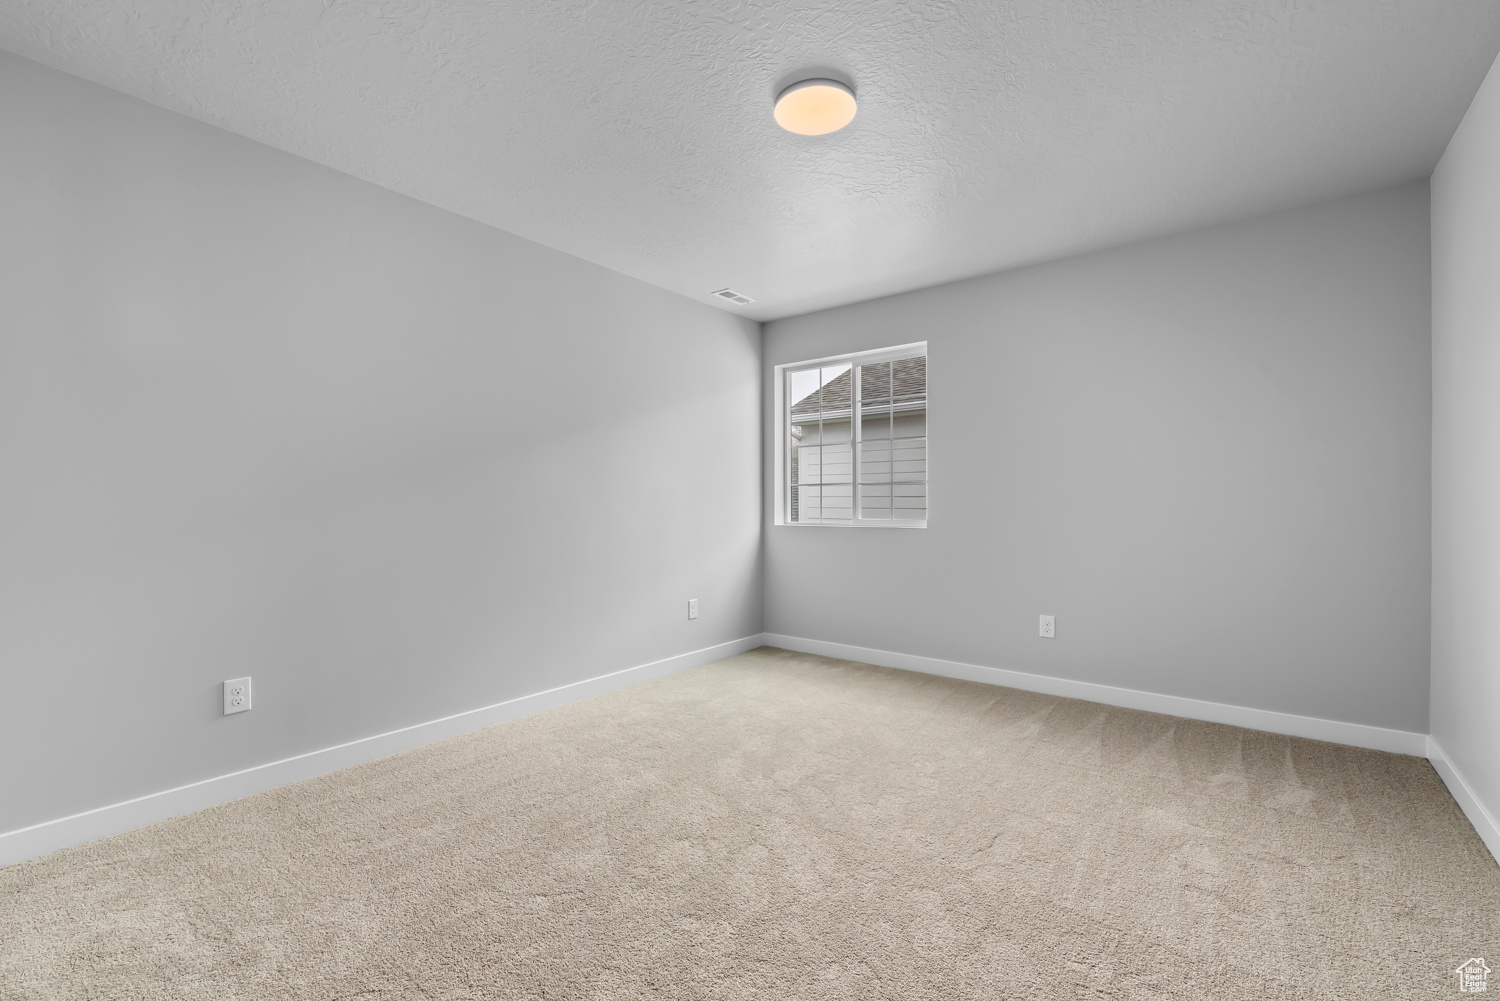 Unfurnished room with light colored carpet and a textured ceiling